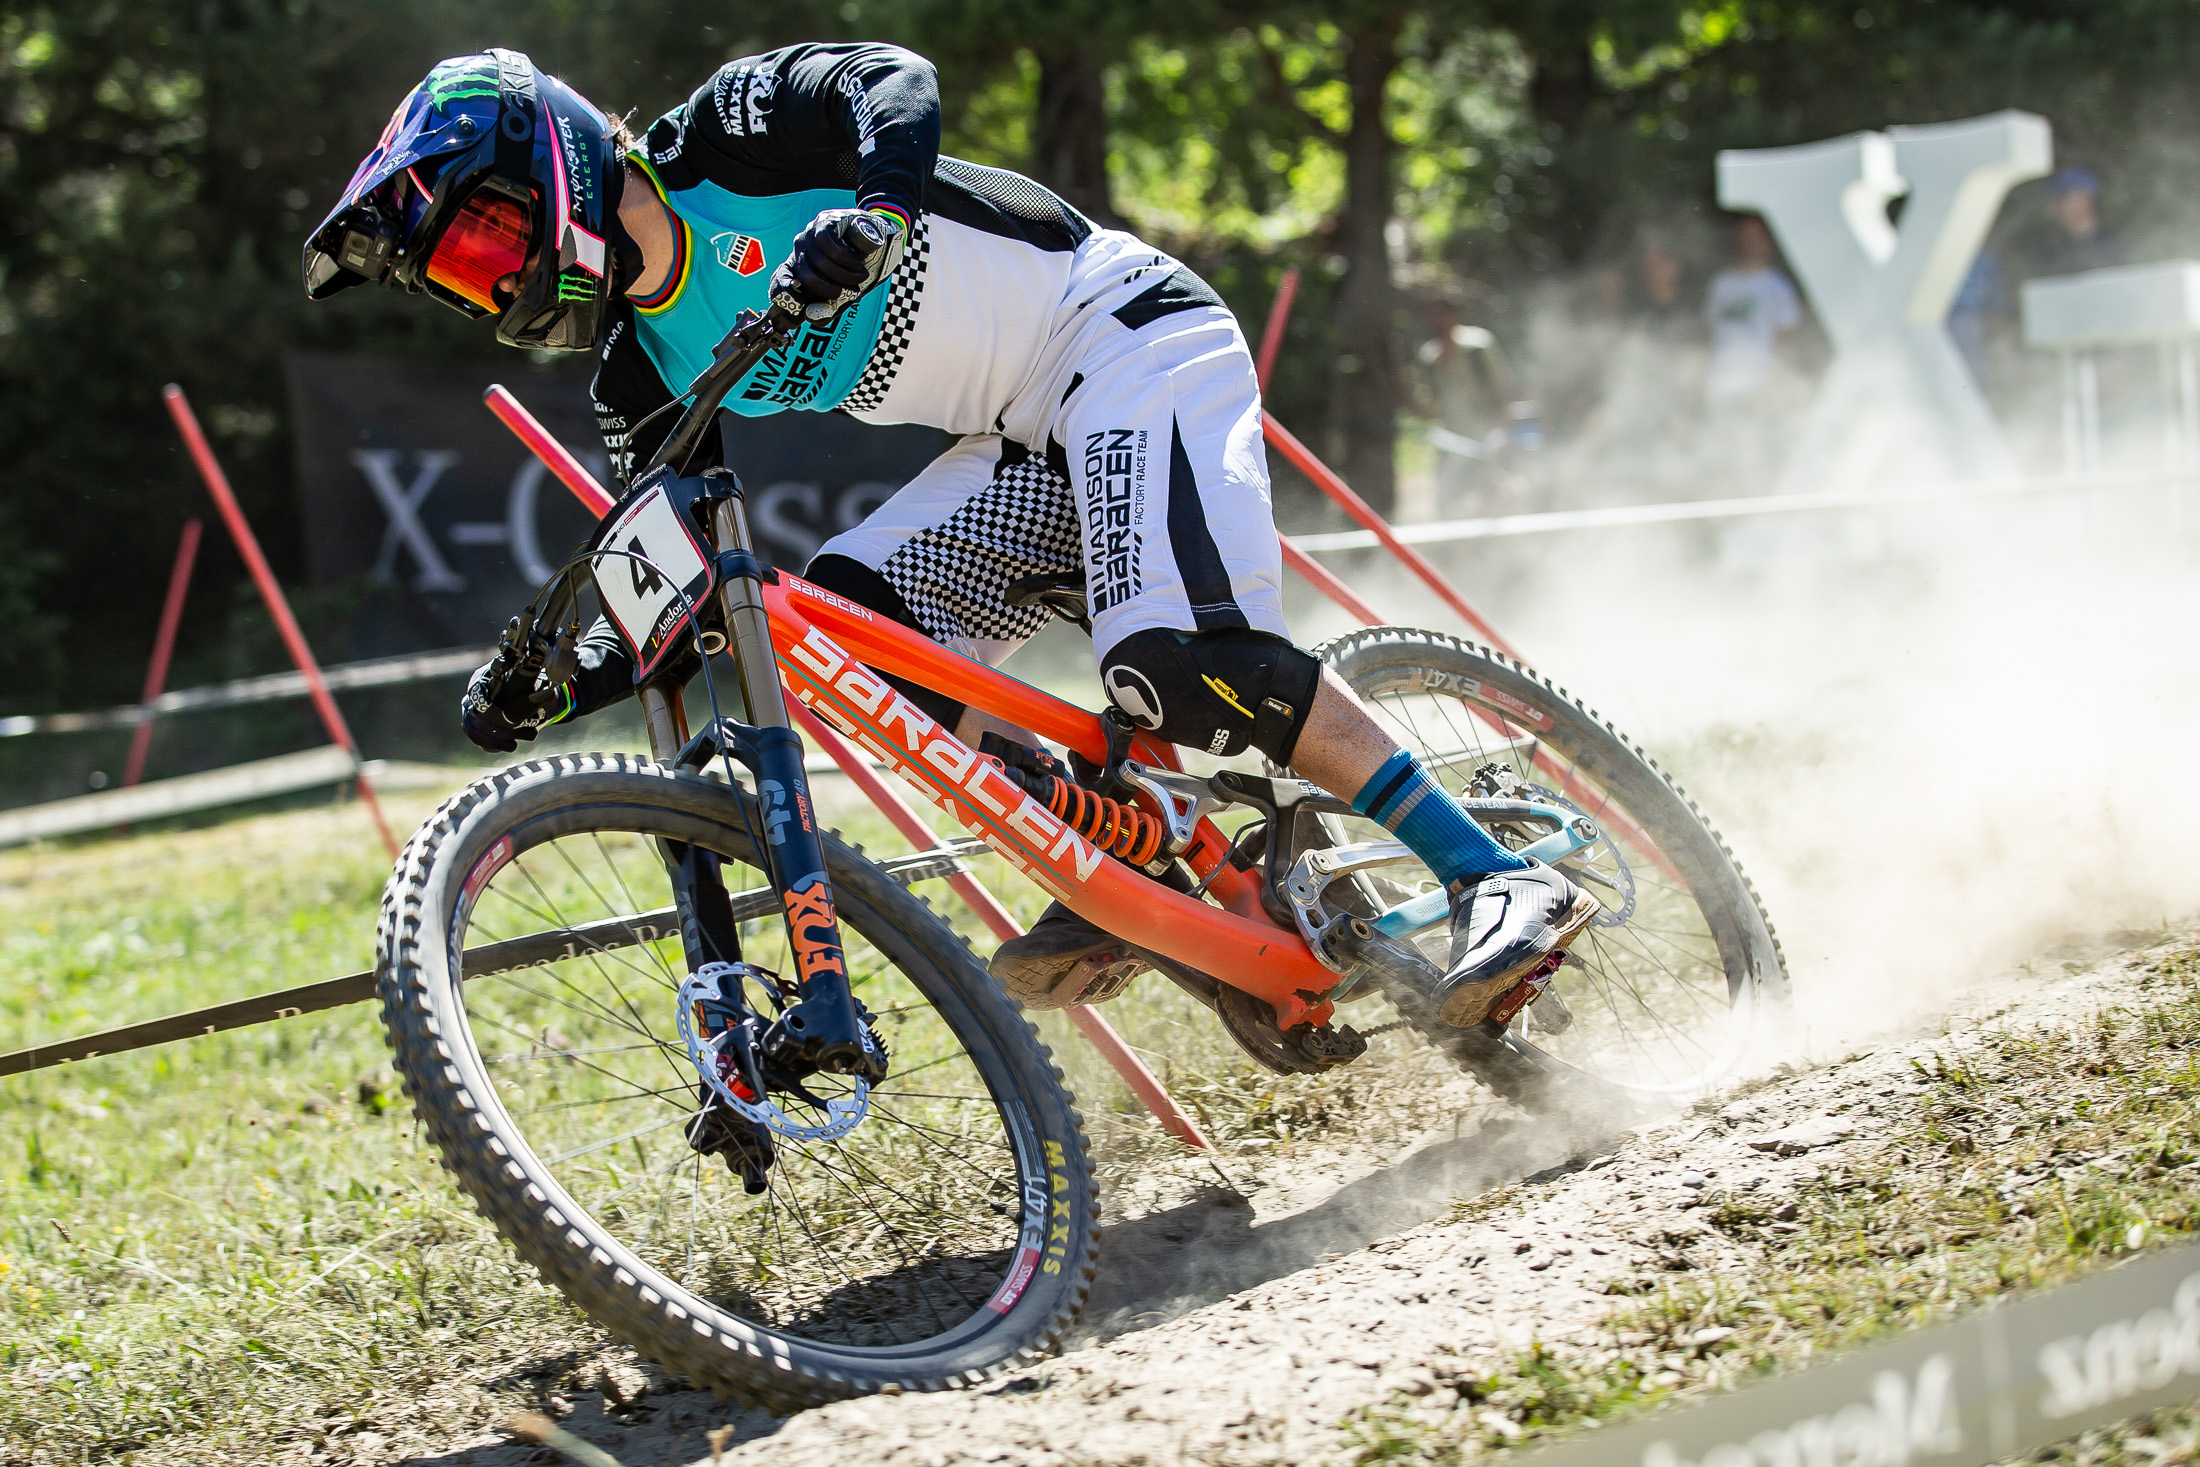 Monster Energy’s Danny Hart Takes Fifth Place at the UCI Mountain Bike World Cup Downhill  in Vallnord, Andorra